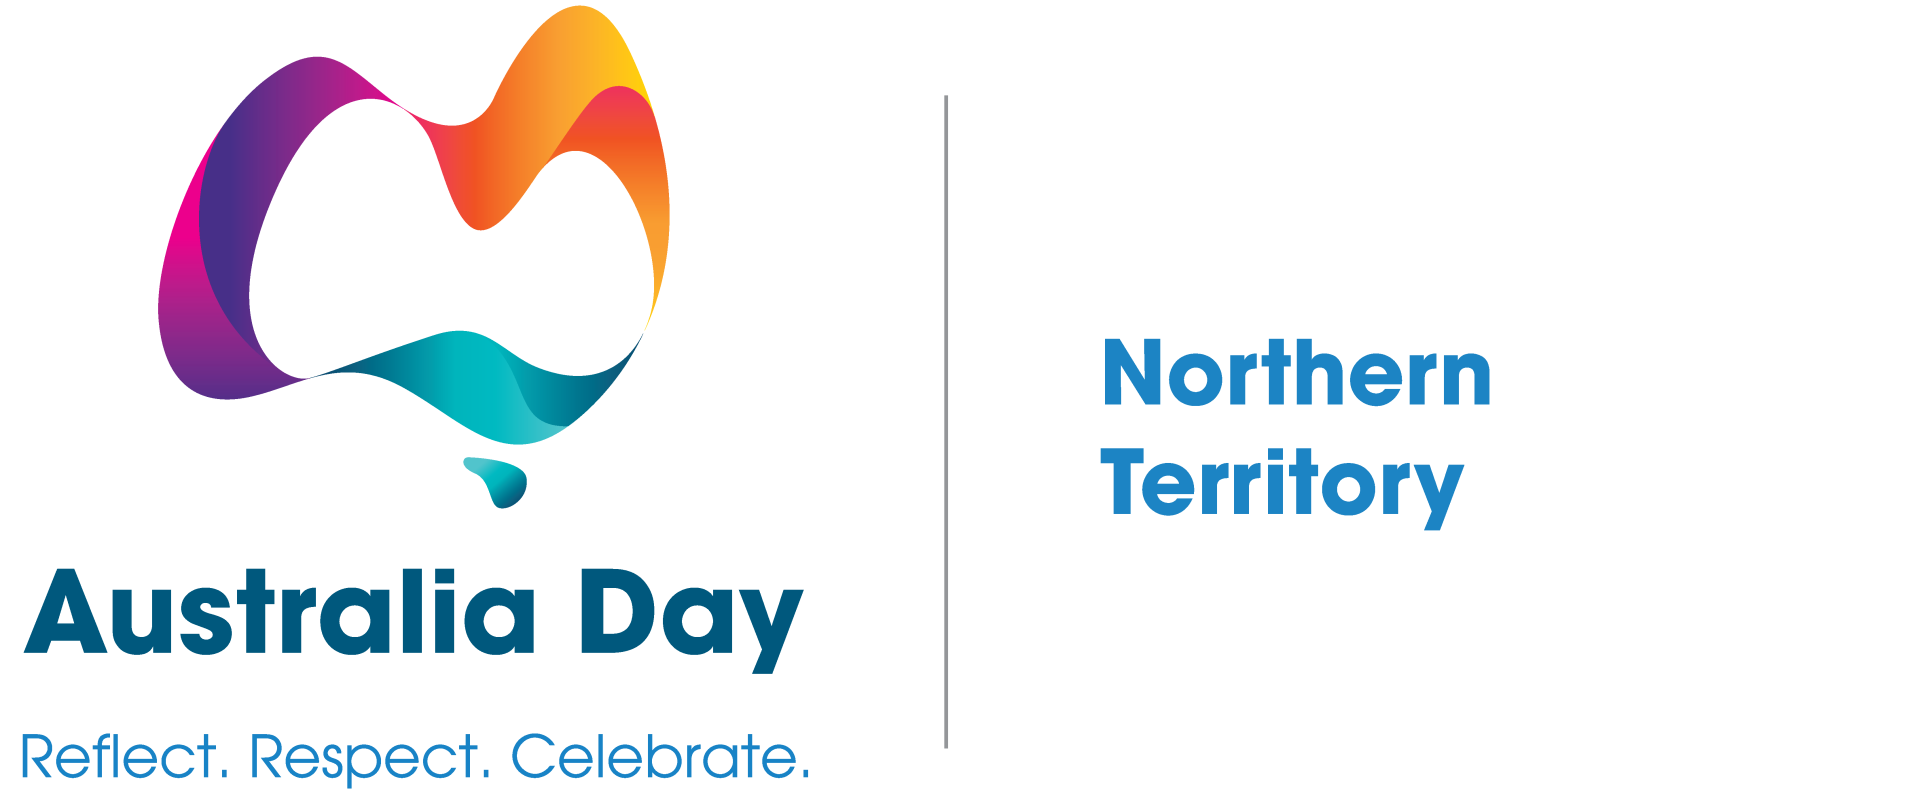 Australia Day Council Northern Territory